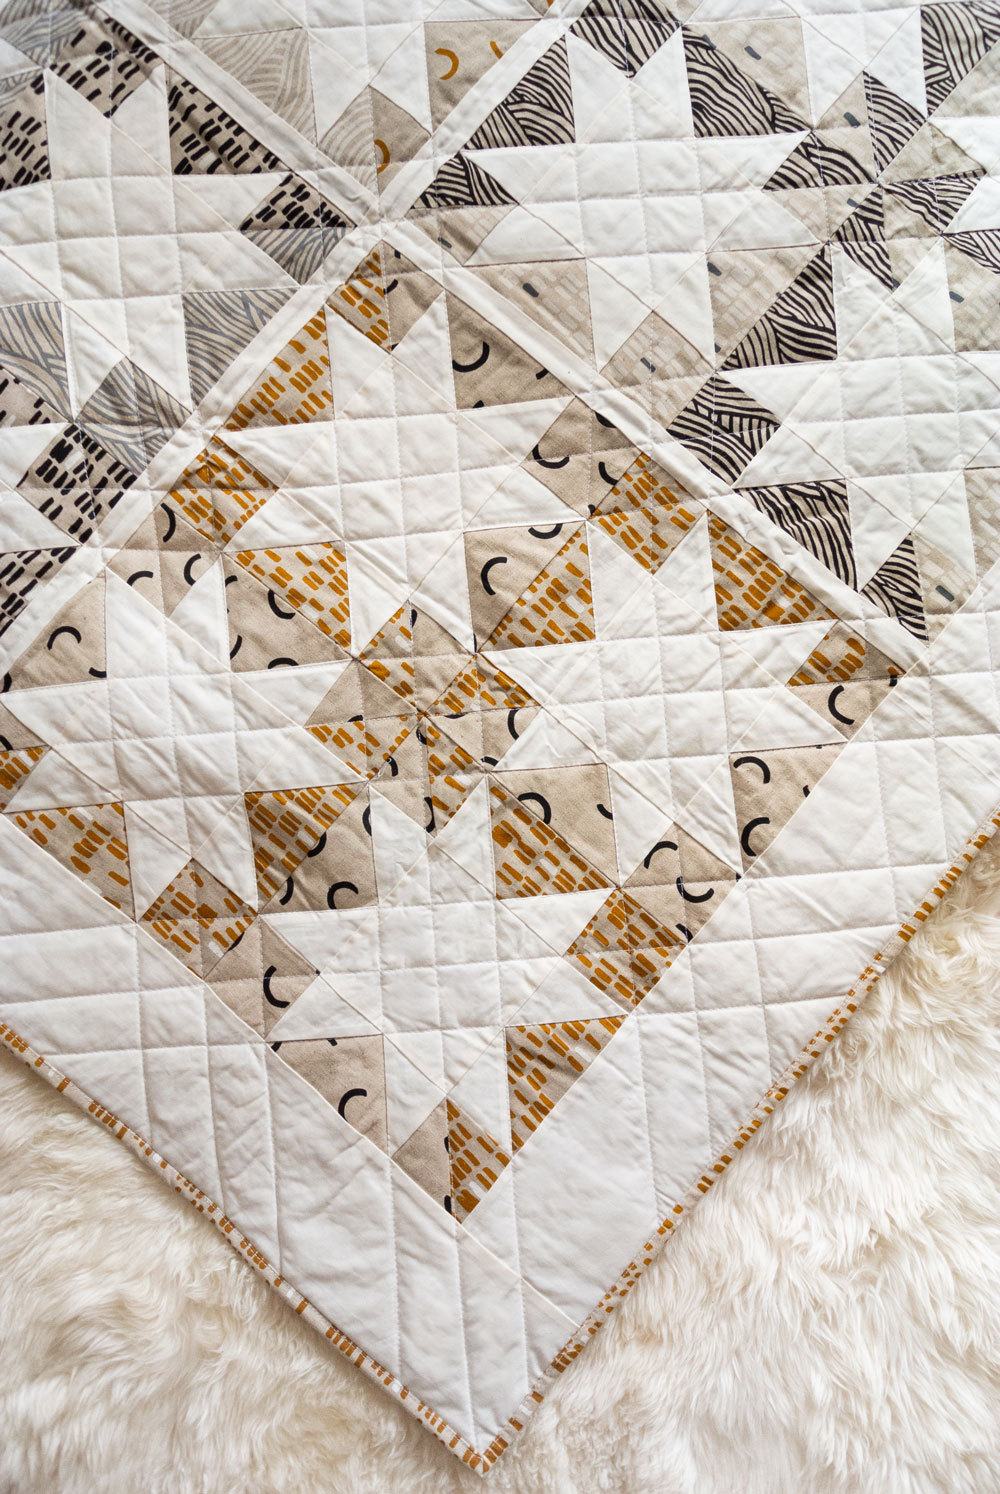 Make a sophisticated, neutral quilt using the Stars Hollow quilt pattern. This is a classic quilt pattern, but with a modern twist. The design plays on negative space to create traditional sawtooth star quilt blocks. suzyquilts.com #linen #quiltpattern